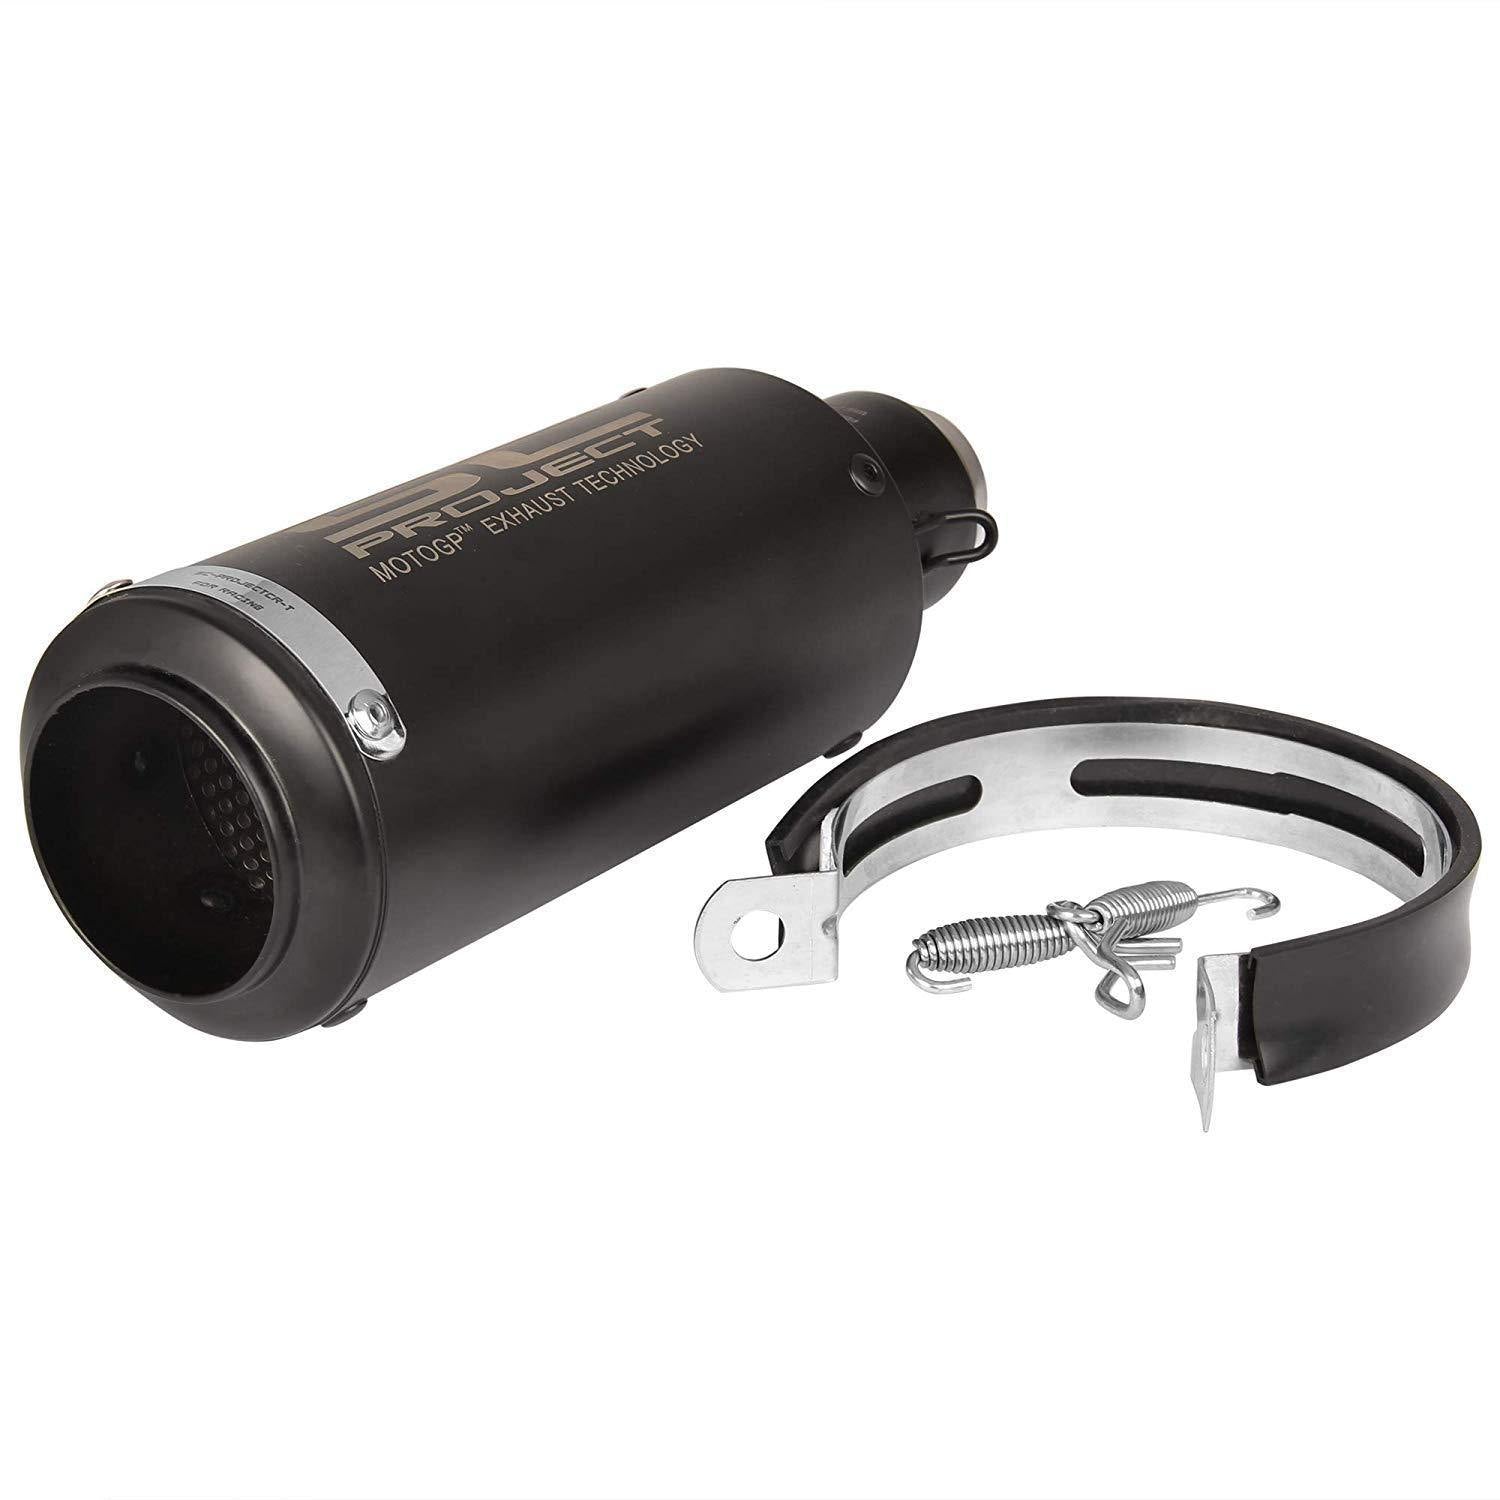 CR-T Black - Premium Exhausts from Sparewick - Just Rs. 2200! Shop now at Sparewick